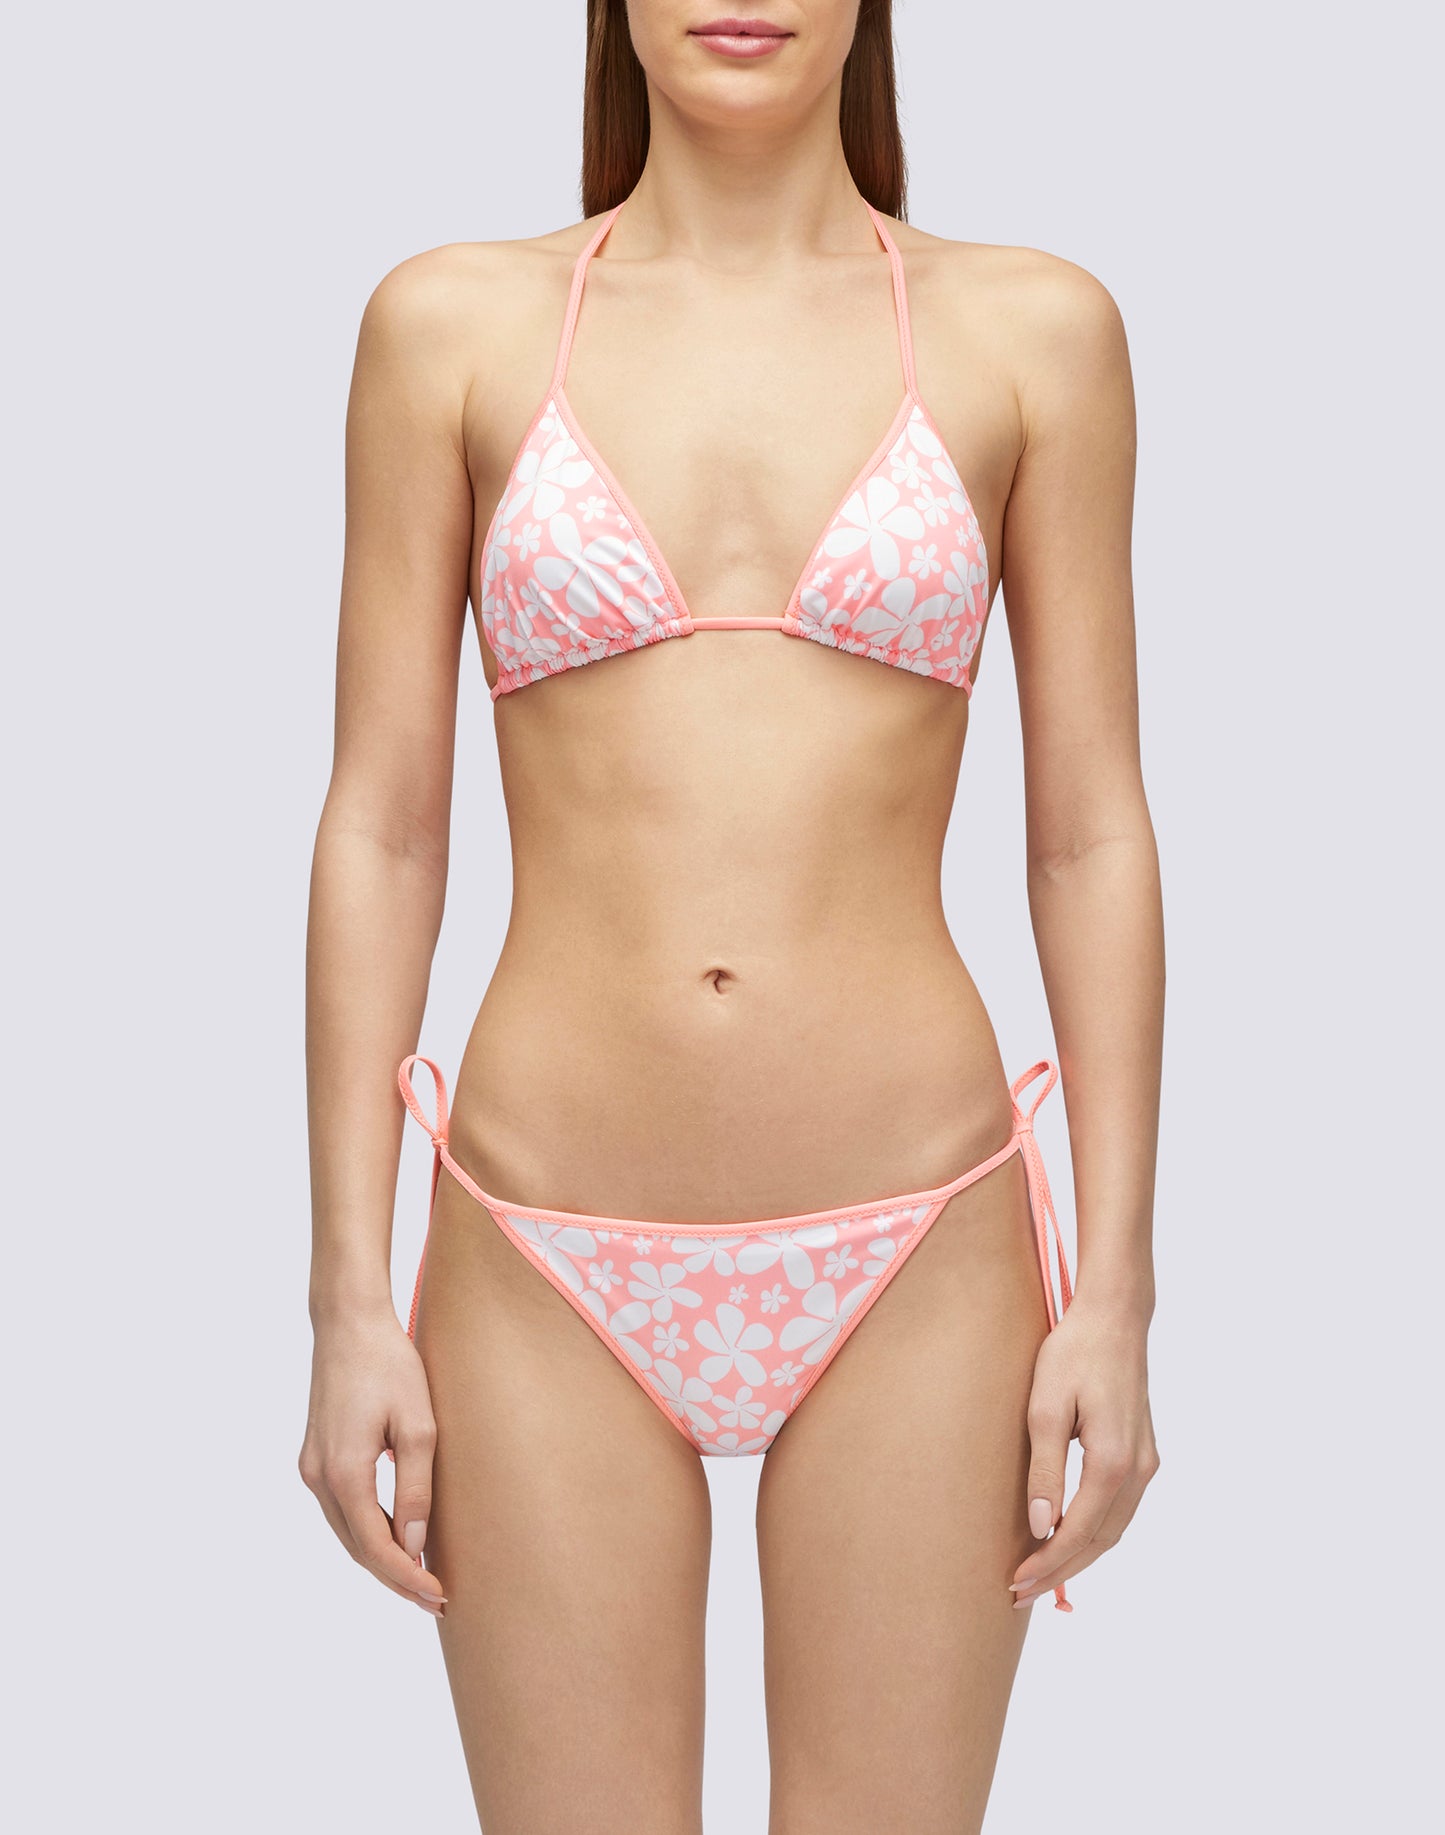 NARI - BRIEFS WITH ADJUSTABLE SIDES WITH ROLLING FLOWER PRINT